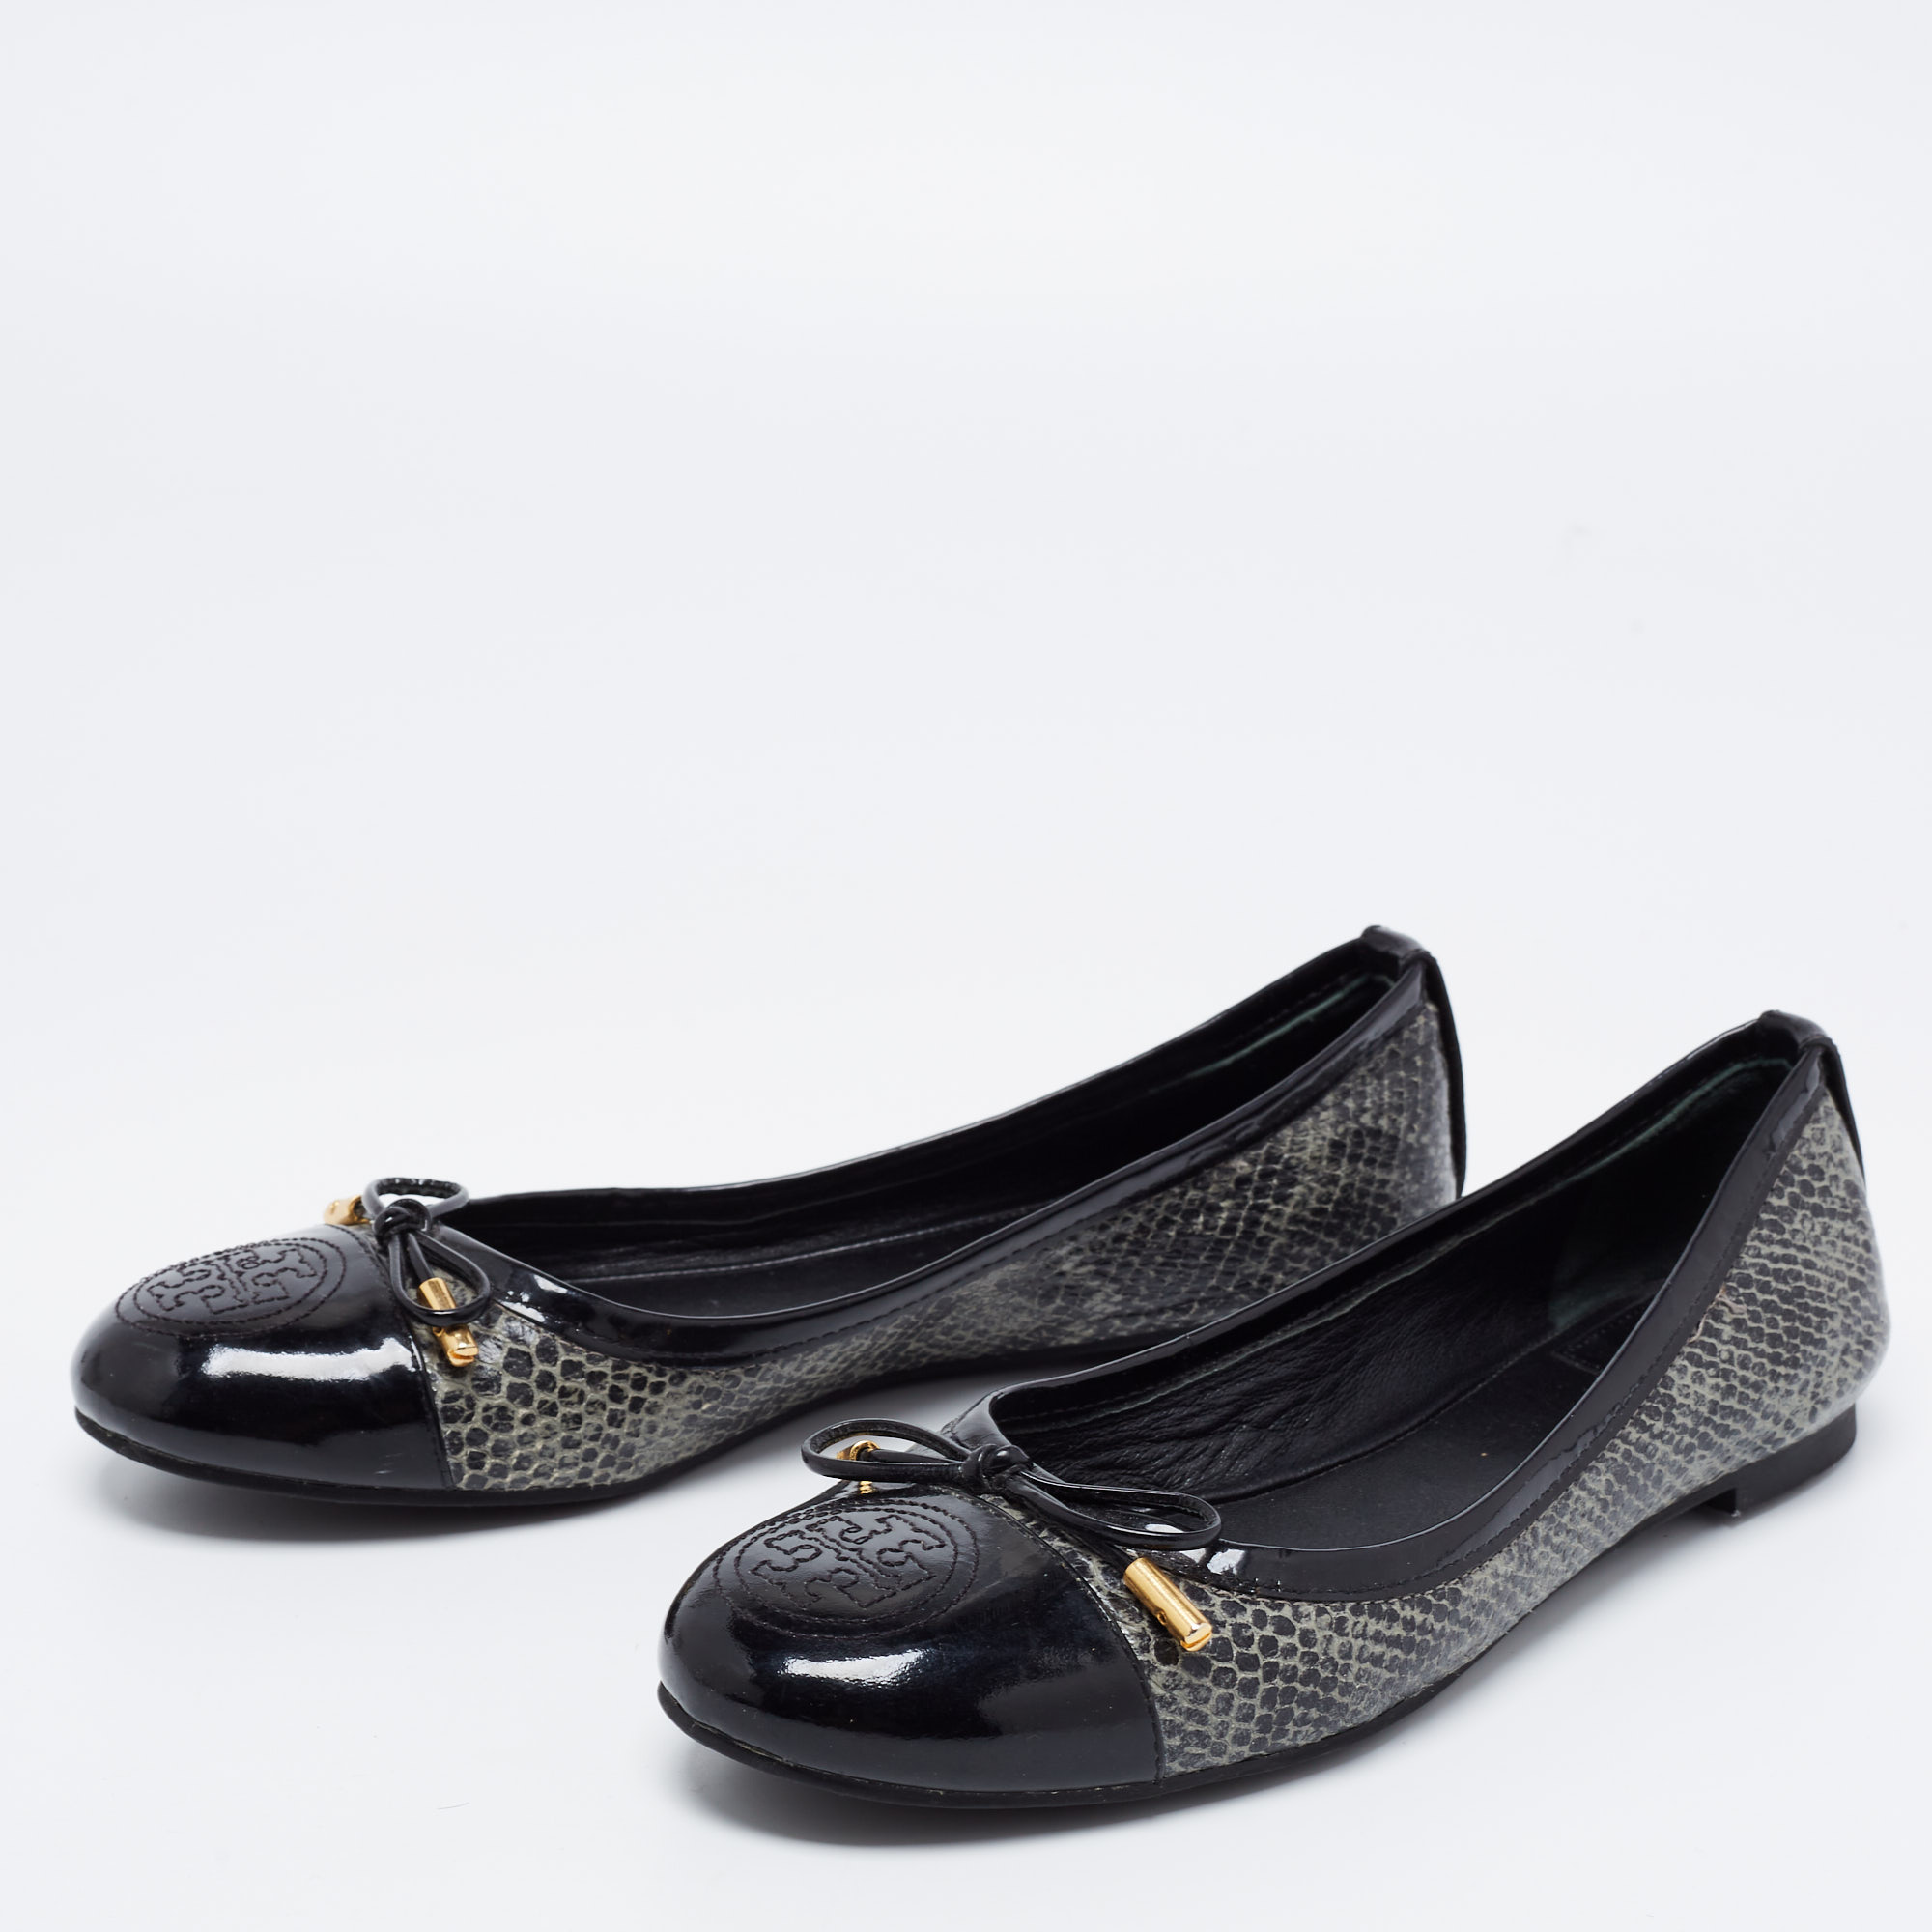 

Tory Burch Black/Grey Patent Leather and Embossed Snakeskin Verbena Tribal Ballet Flats Size